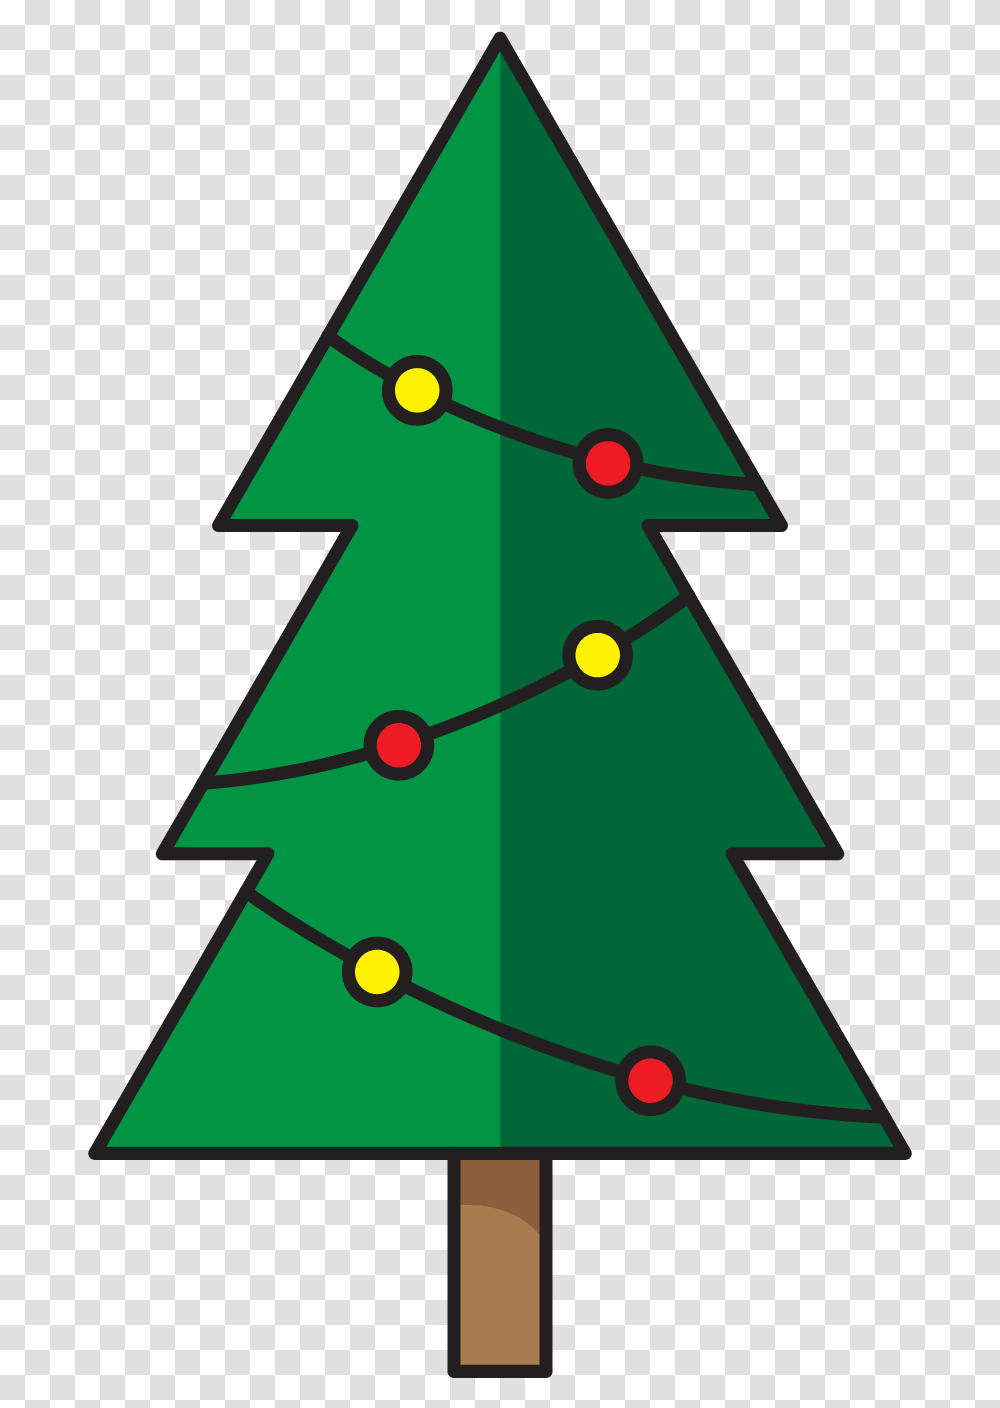 Christmas Tree Icon Graphic New Year Tree, Plant, Symbol, Ornament, Triangle Transparent Png